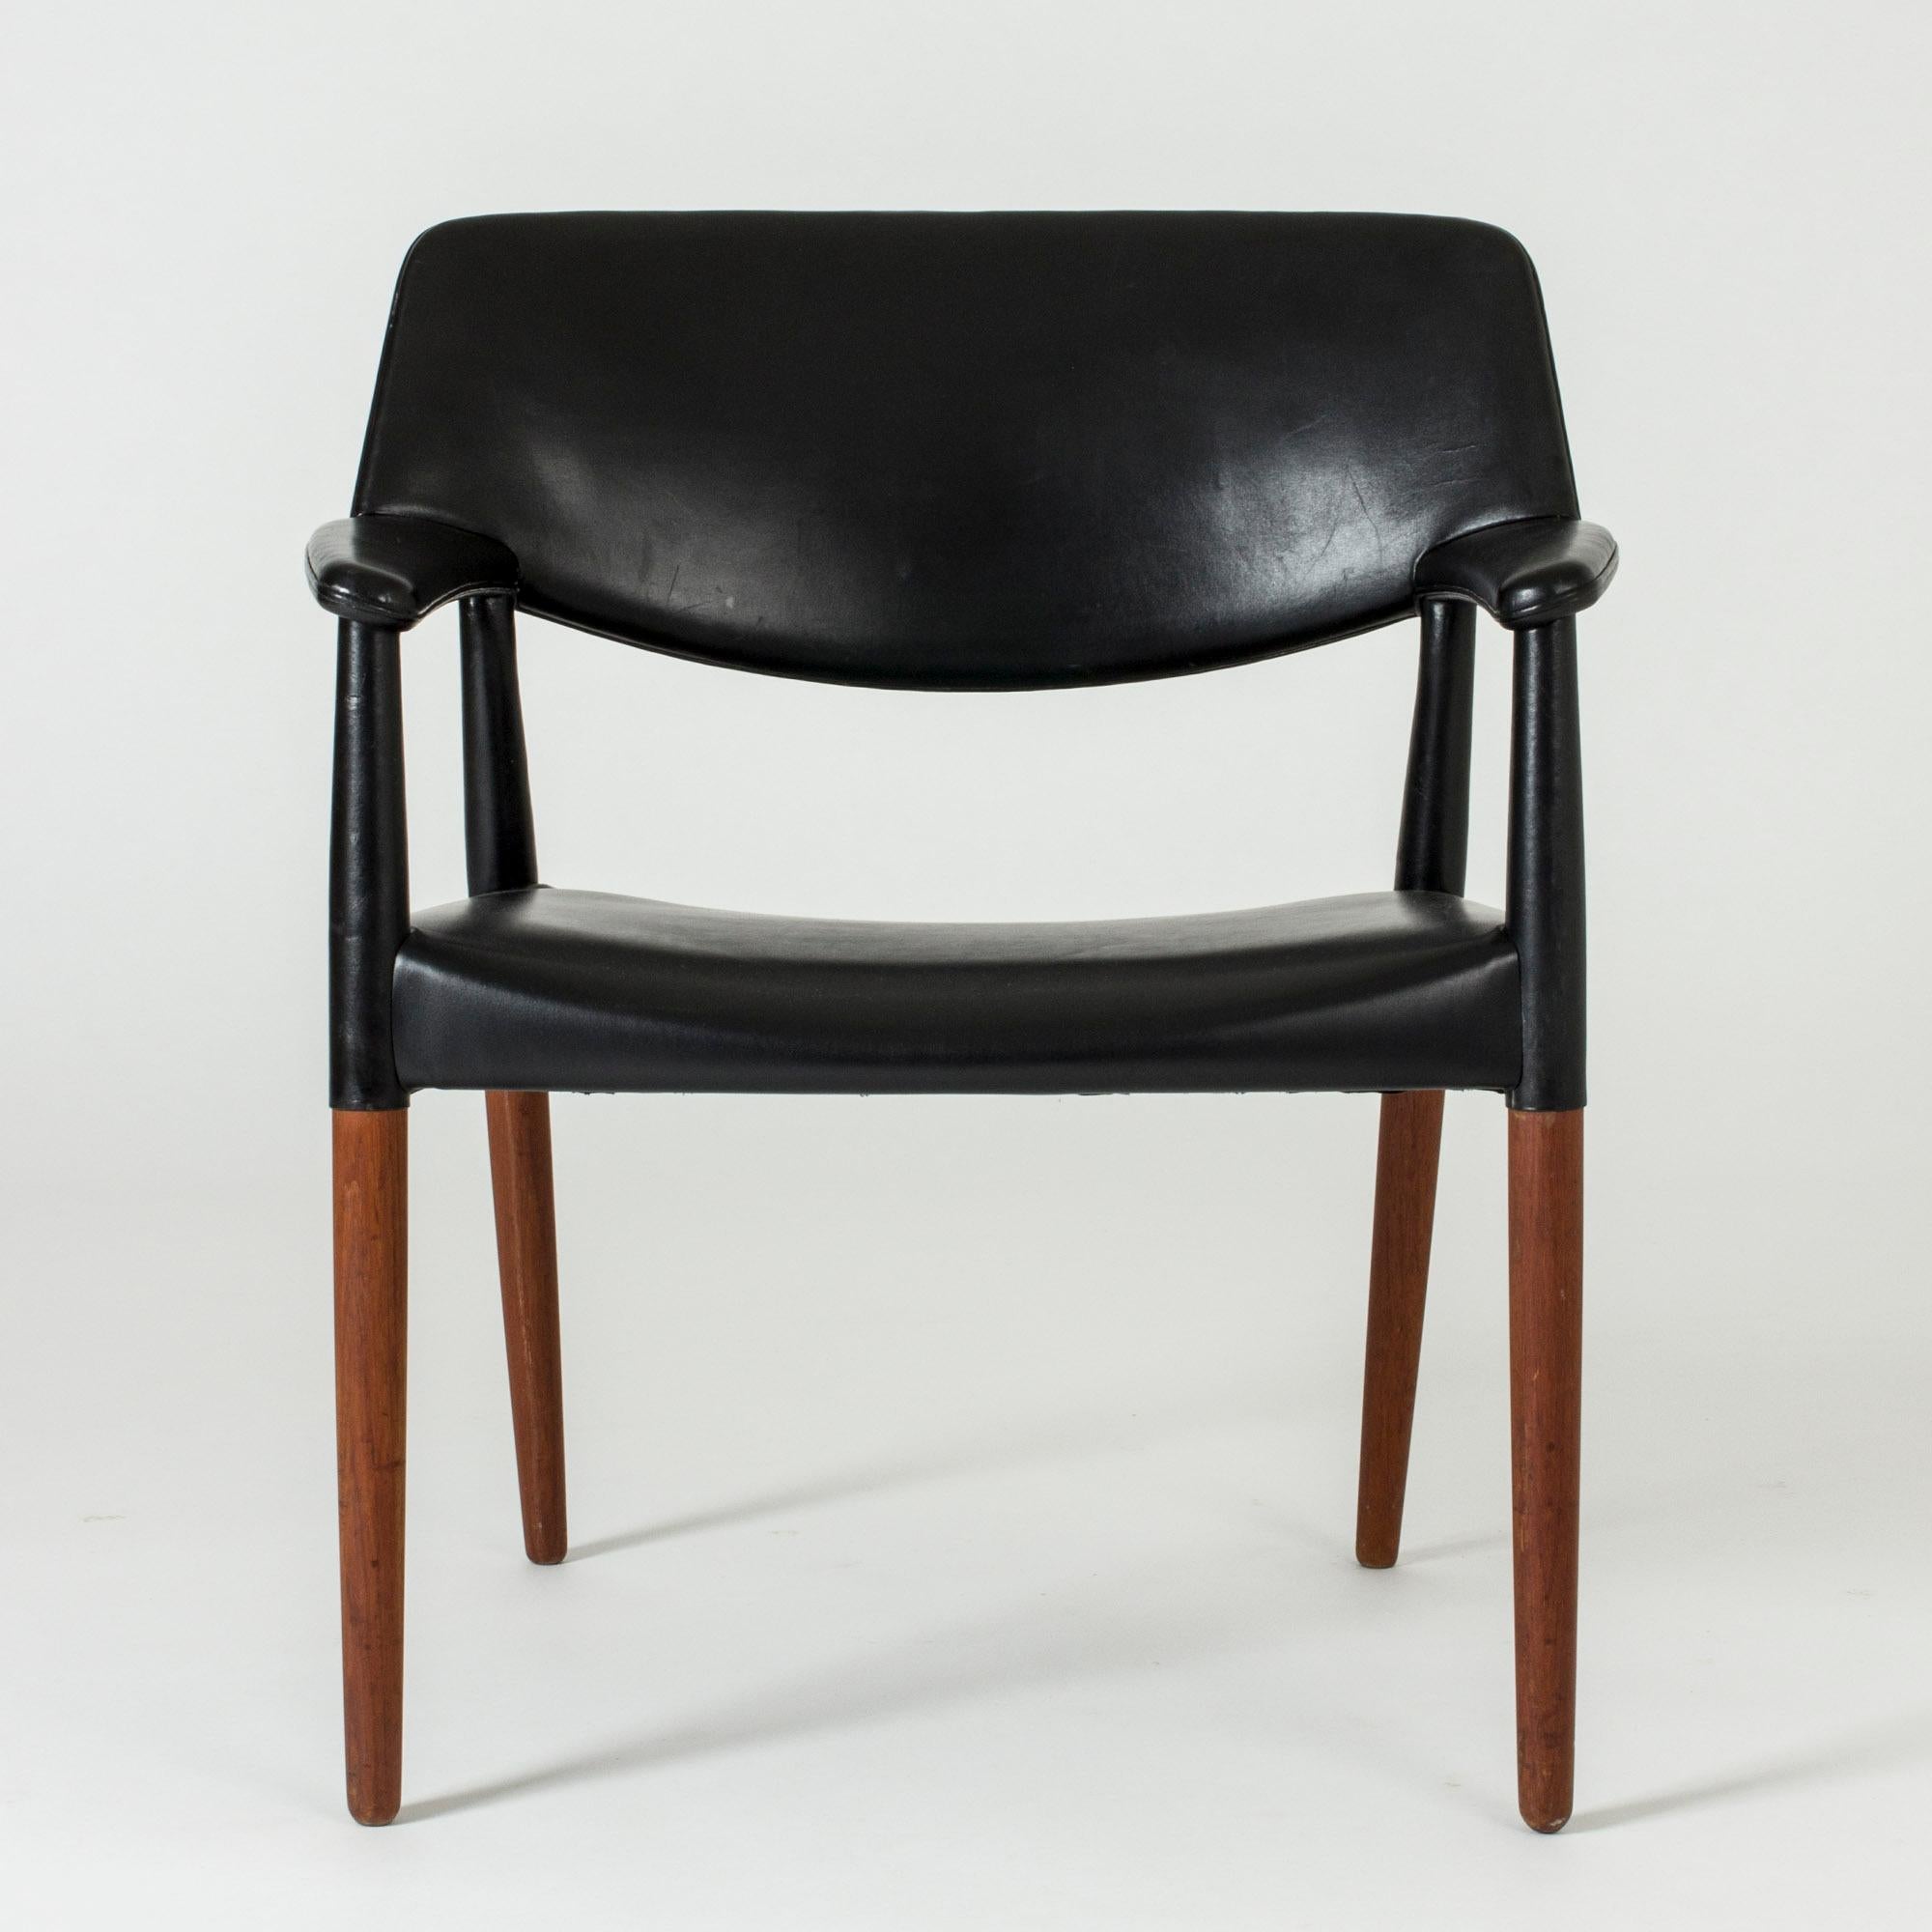 Cool armchair by Aksel Bender Madsen and Ejner Larsen, made from teak and dressed with black leather. High comfort.

Measure: Seat height 42 cm.